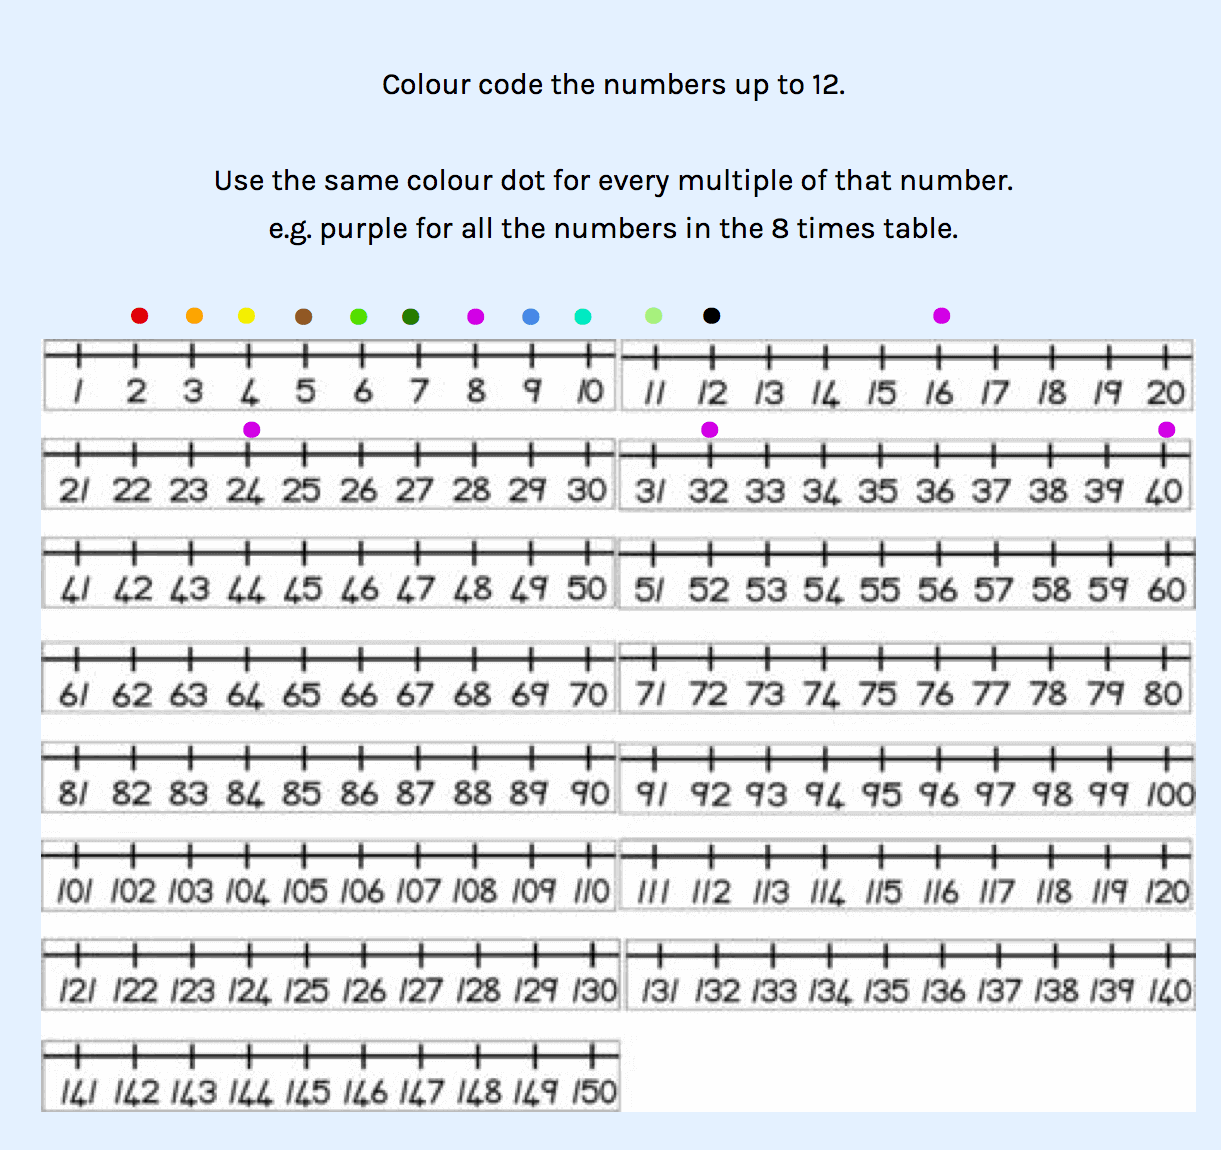 example of how to find common factors and multiples using colors